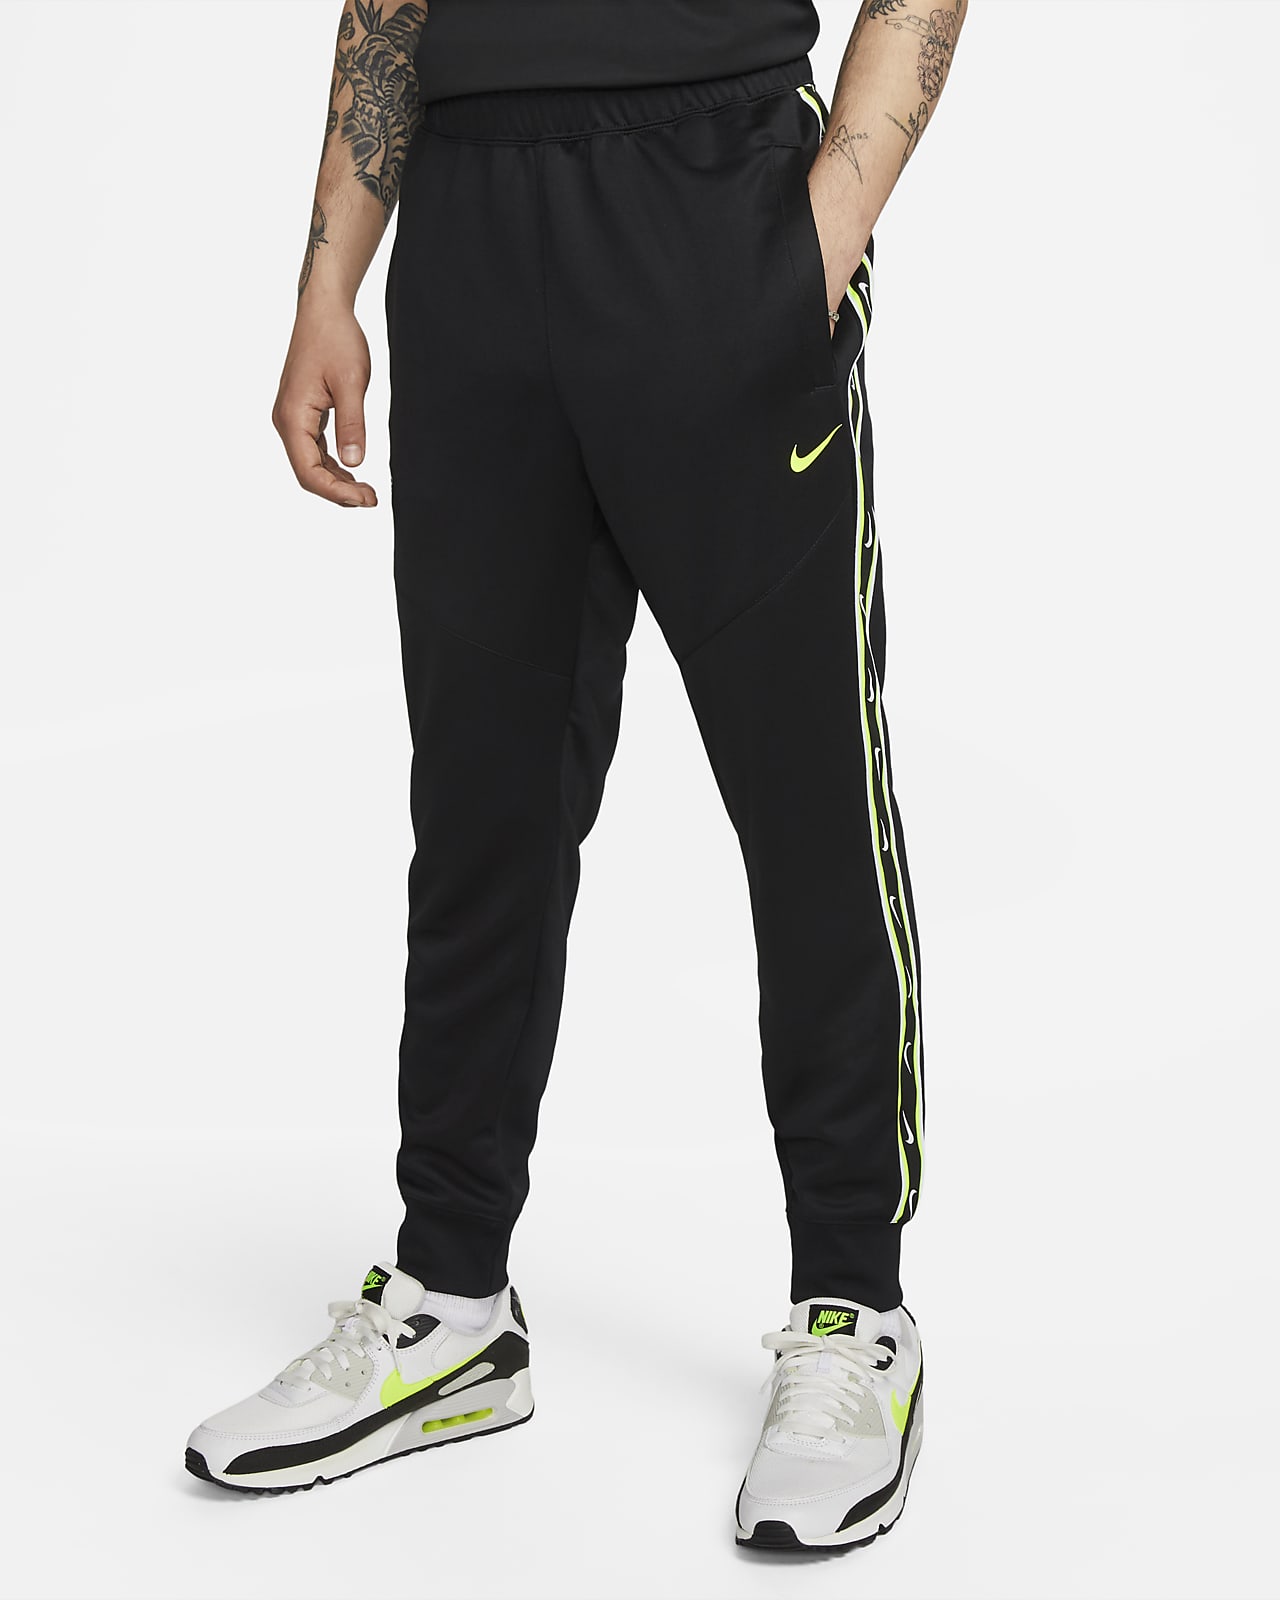 joggers nike homme